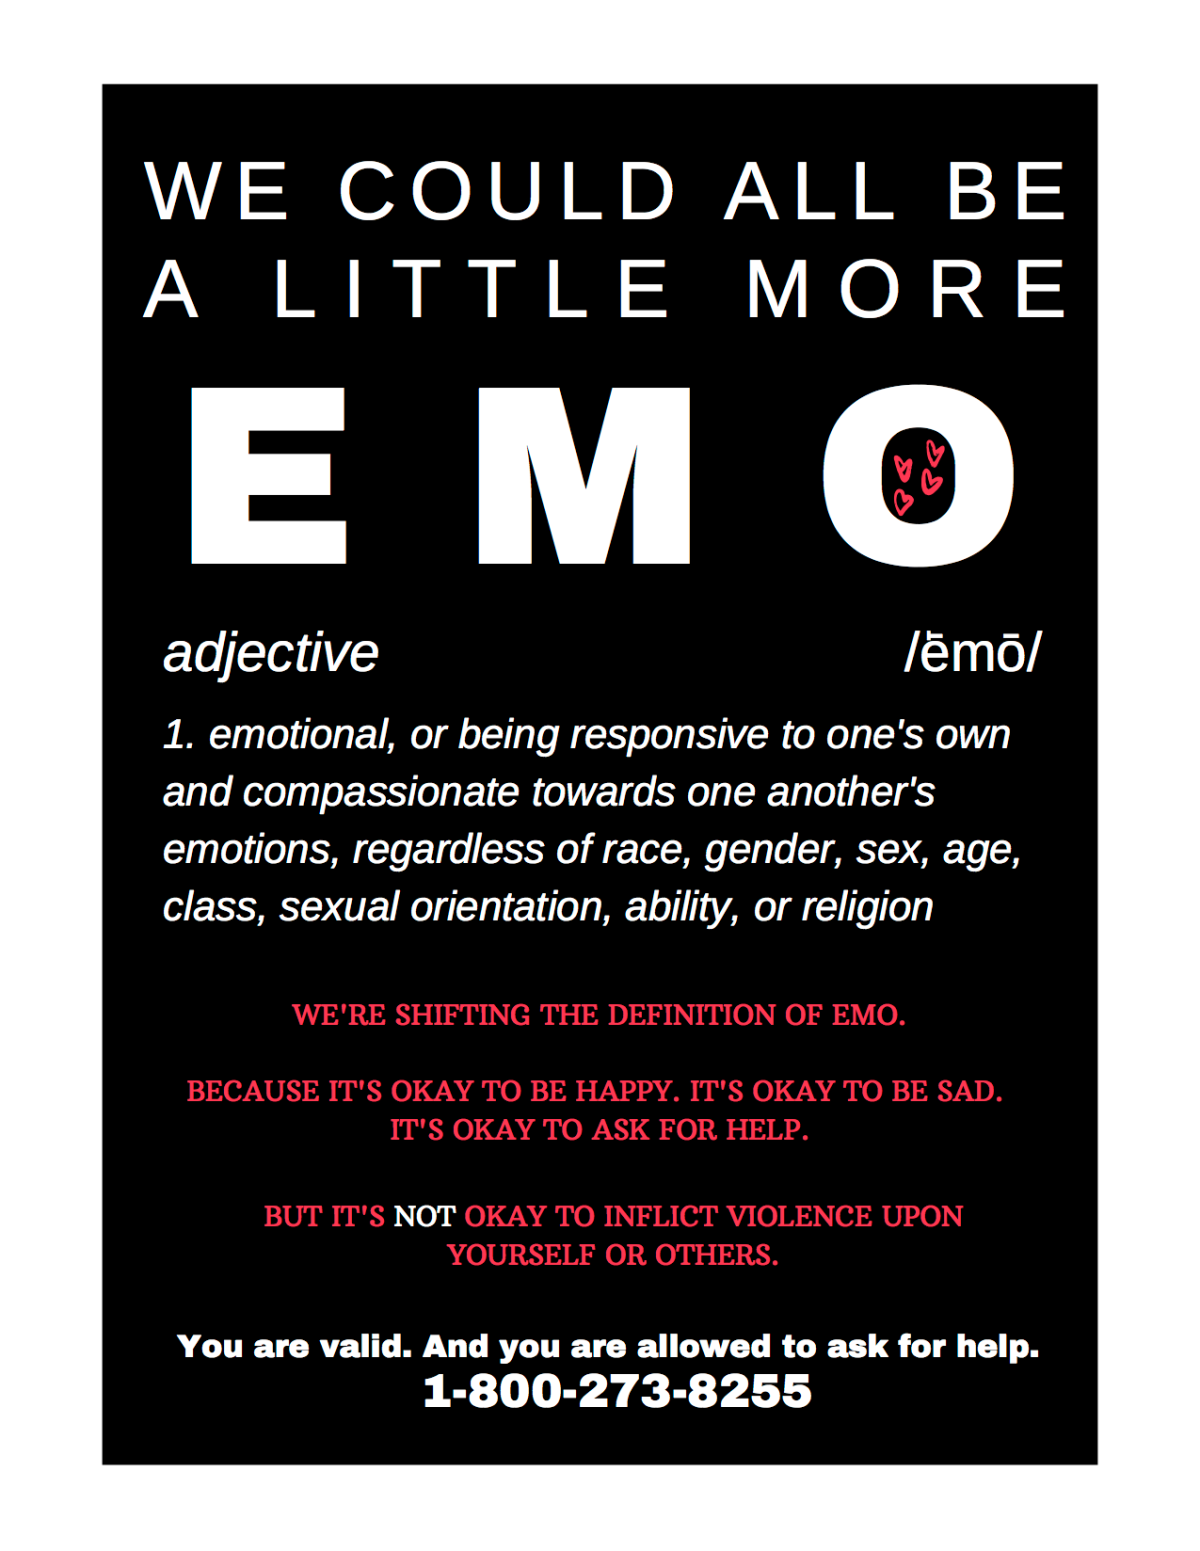 Make America Emo (But Not Again – Let’s Redefine It and Avoid the Misogyny and Hegemonic Masculinity of Its Past, Please and Thank You)